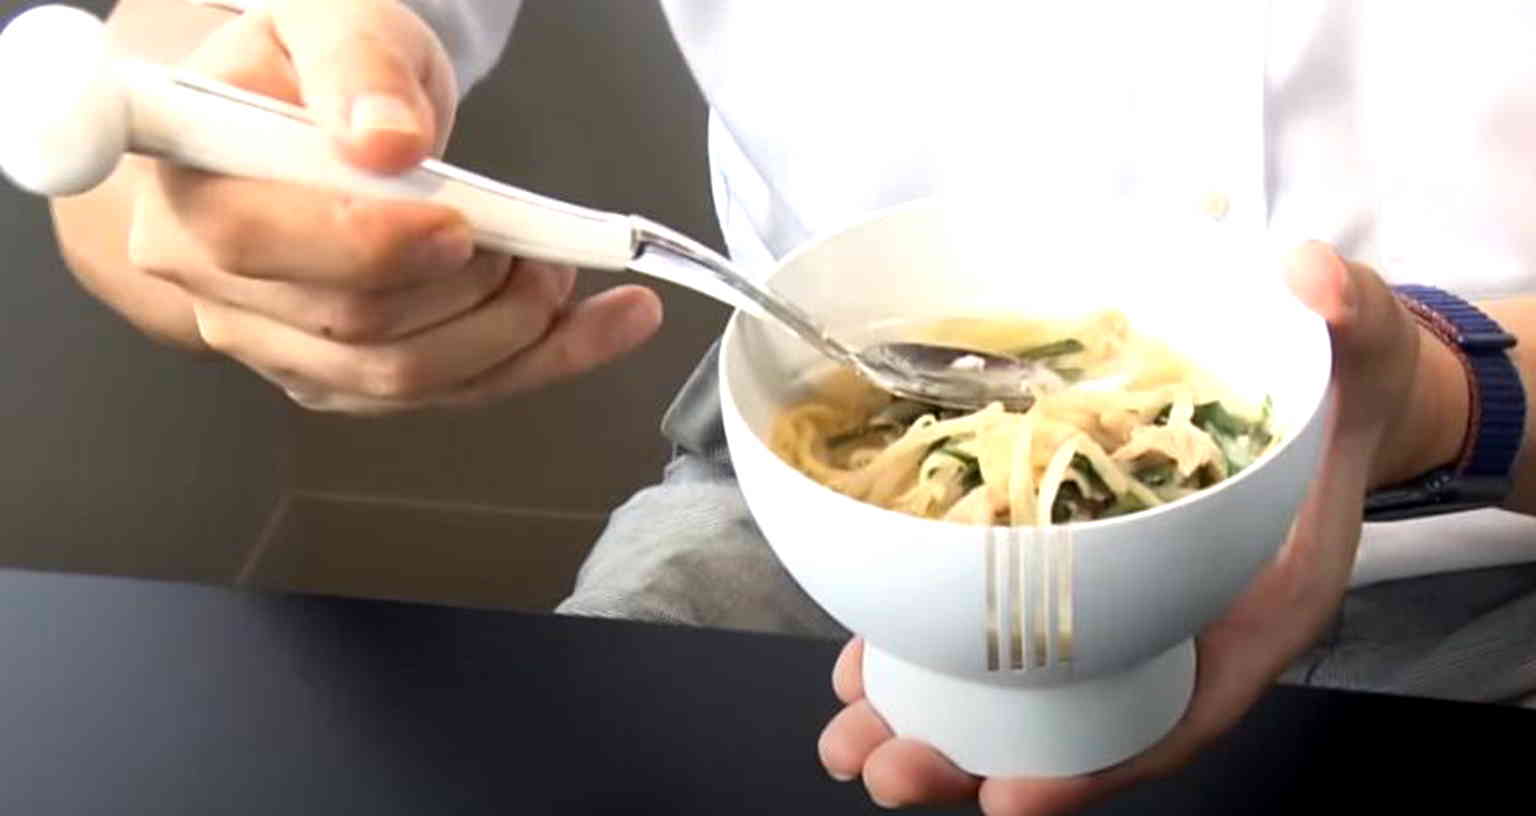 Electric spoon and bowl that makes food taste saltier set for release next year